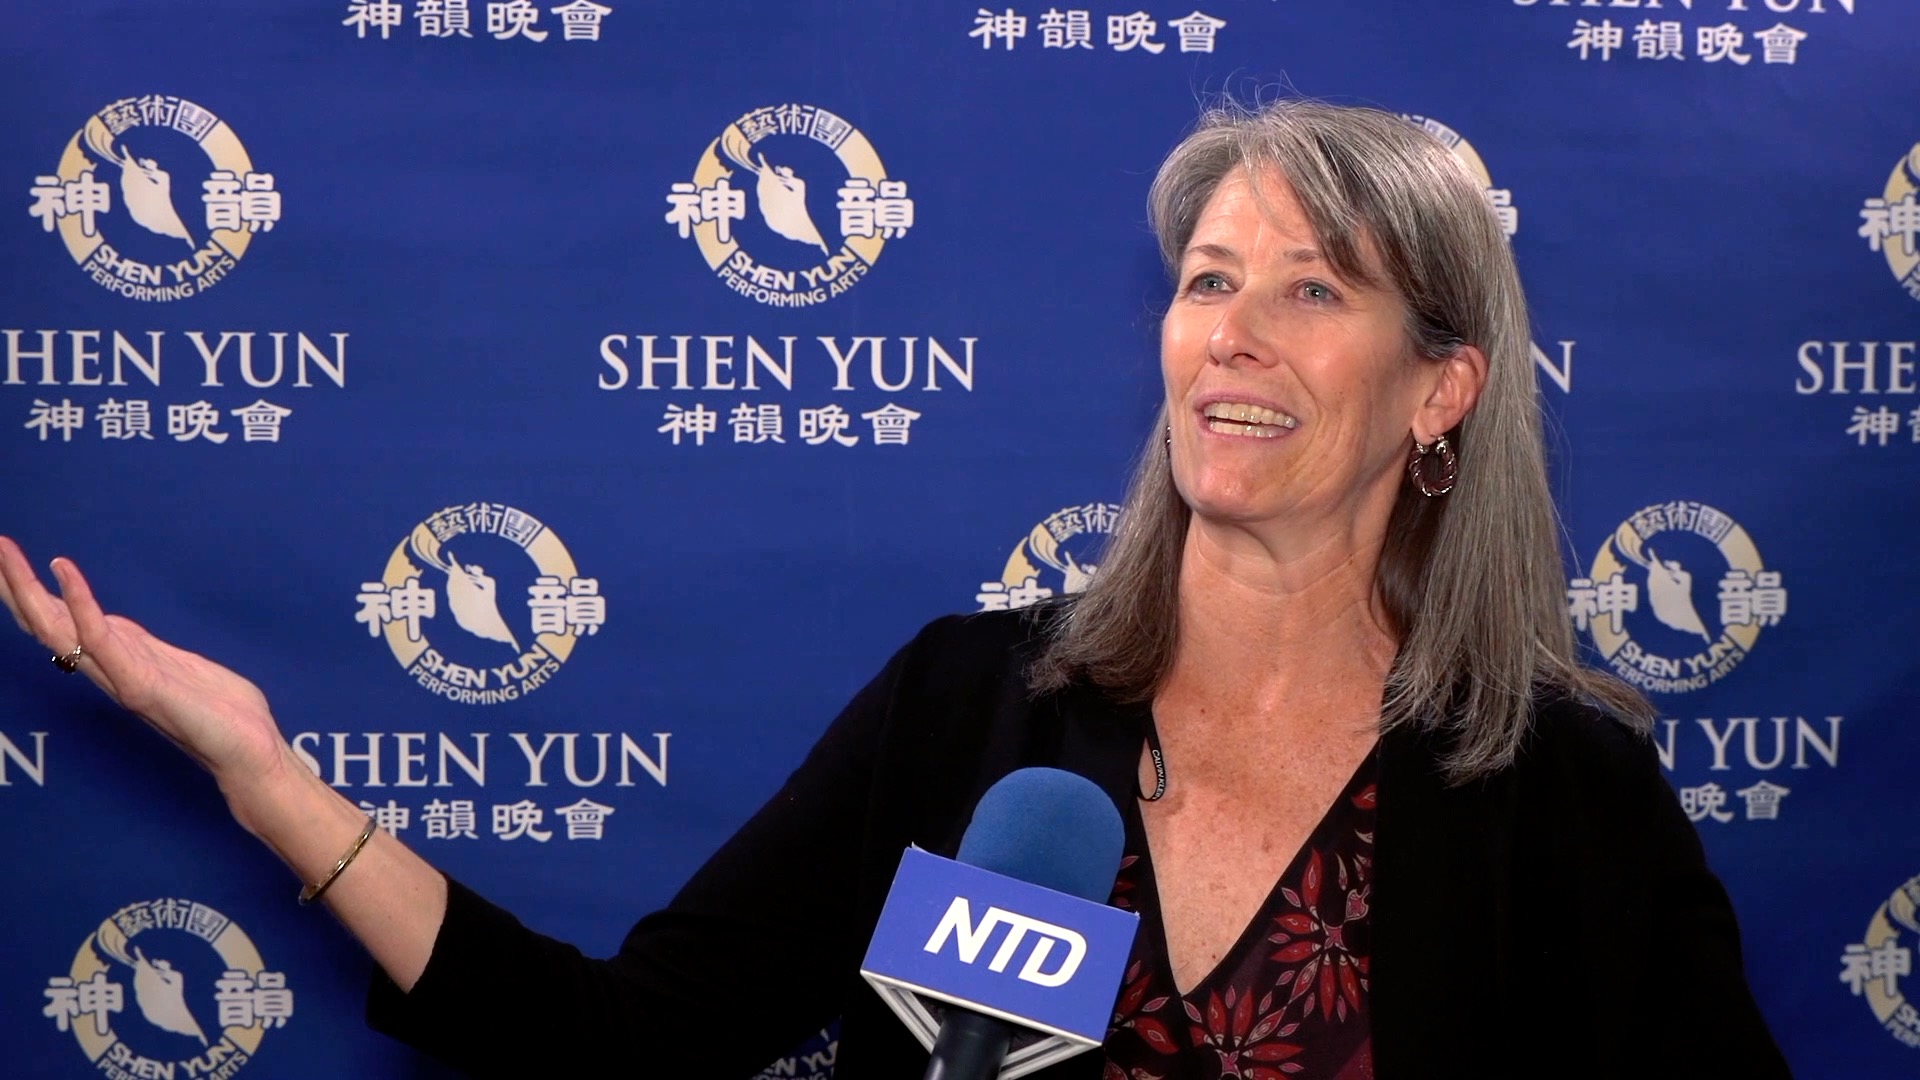 'I Was in Heaven' Says Business Owner After Seeing Shen Yun